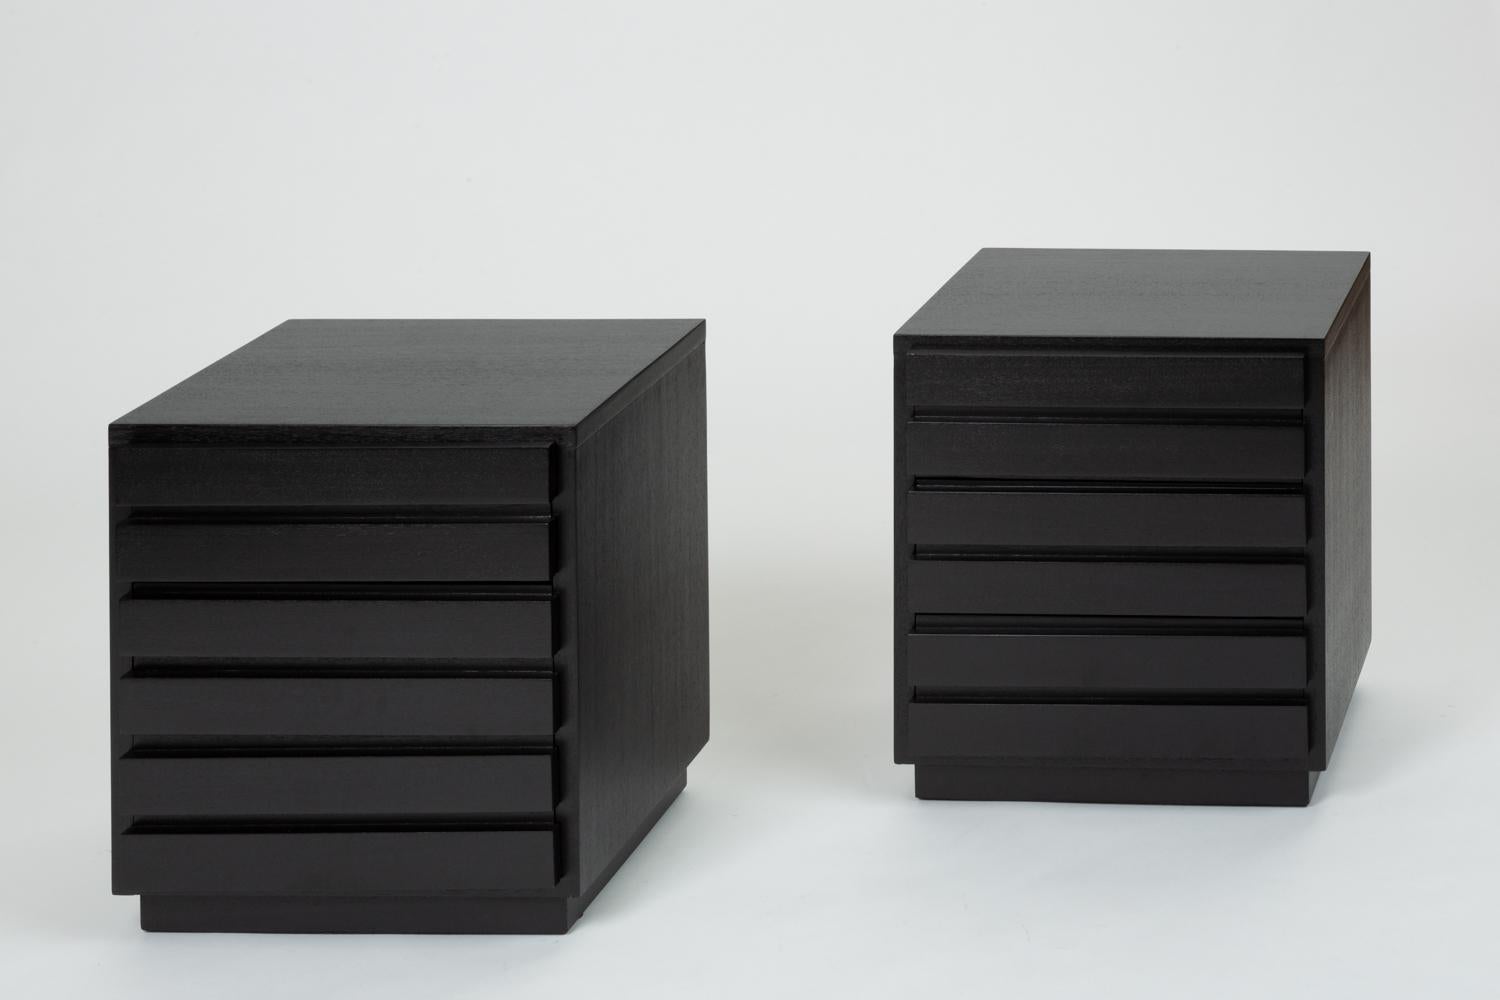 A pair of nightstands from Virginia-based manufacturer, American of Martinsville from the 1950s. The boxy storage pieces sit on a recessed plinth base with three two-panel drawers spaced evenly down the front. Redone with an ebonized finished, the